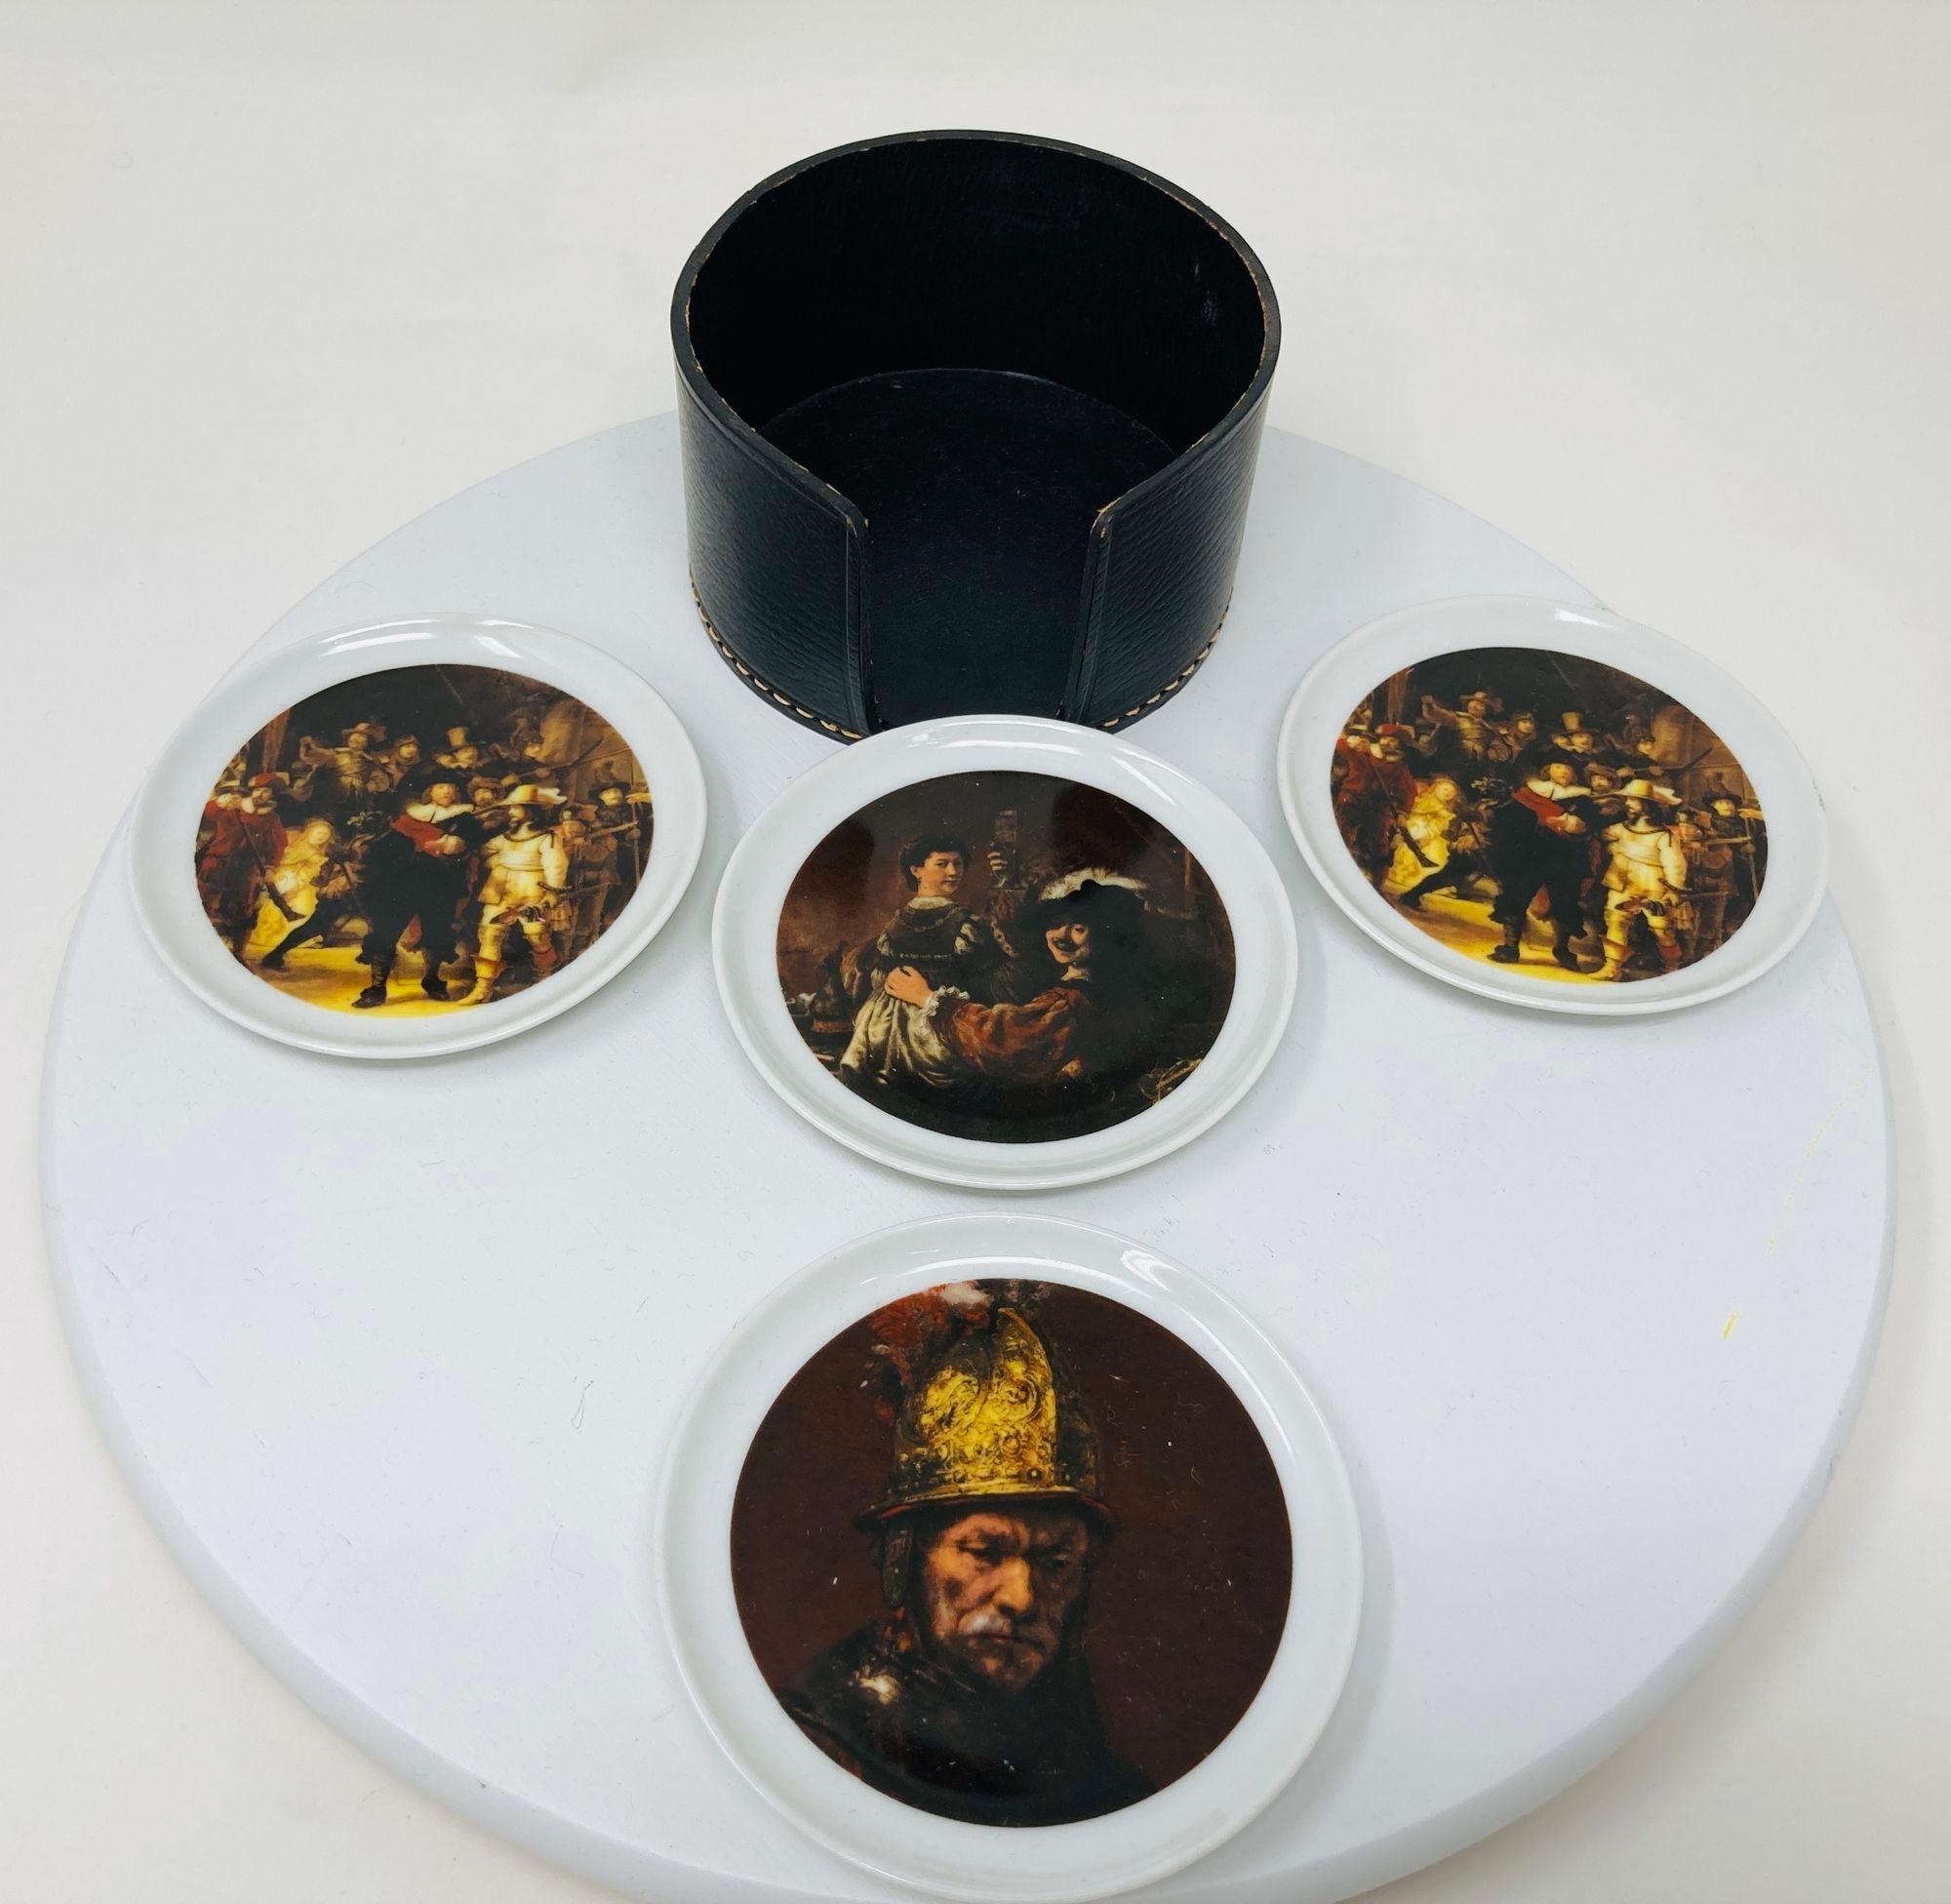 Set of 4 Bareuther Waldsassen Bavaria Germany, ceramic small dishes coasters.
Dimensions: 3.5